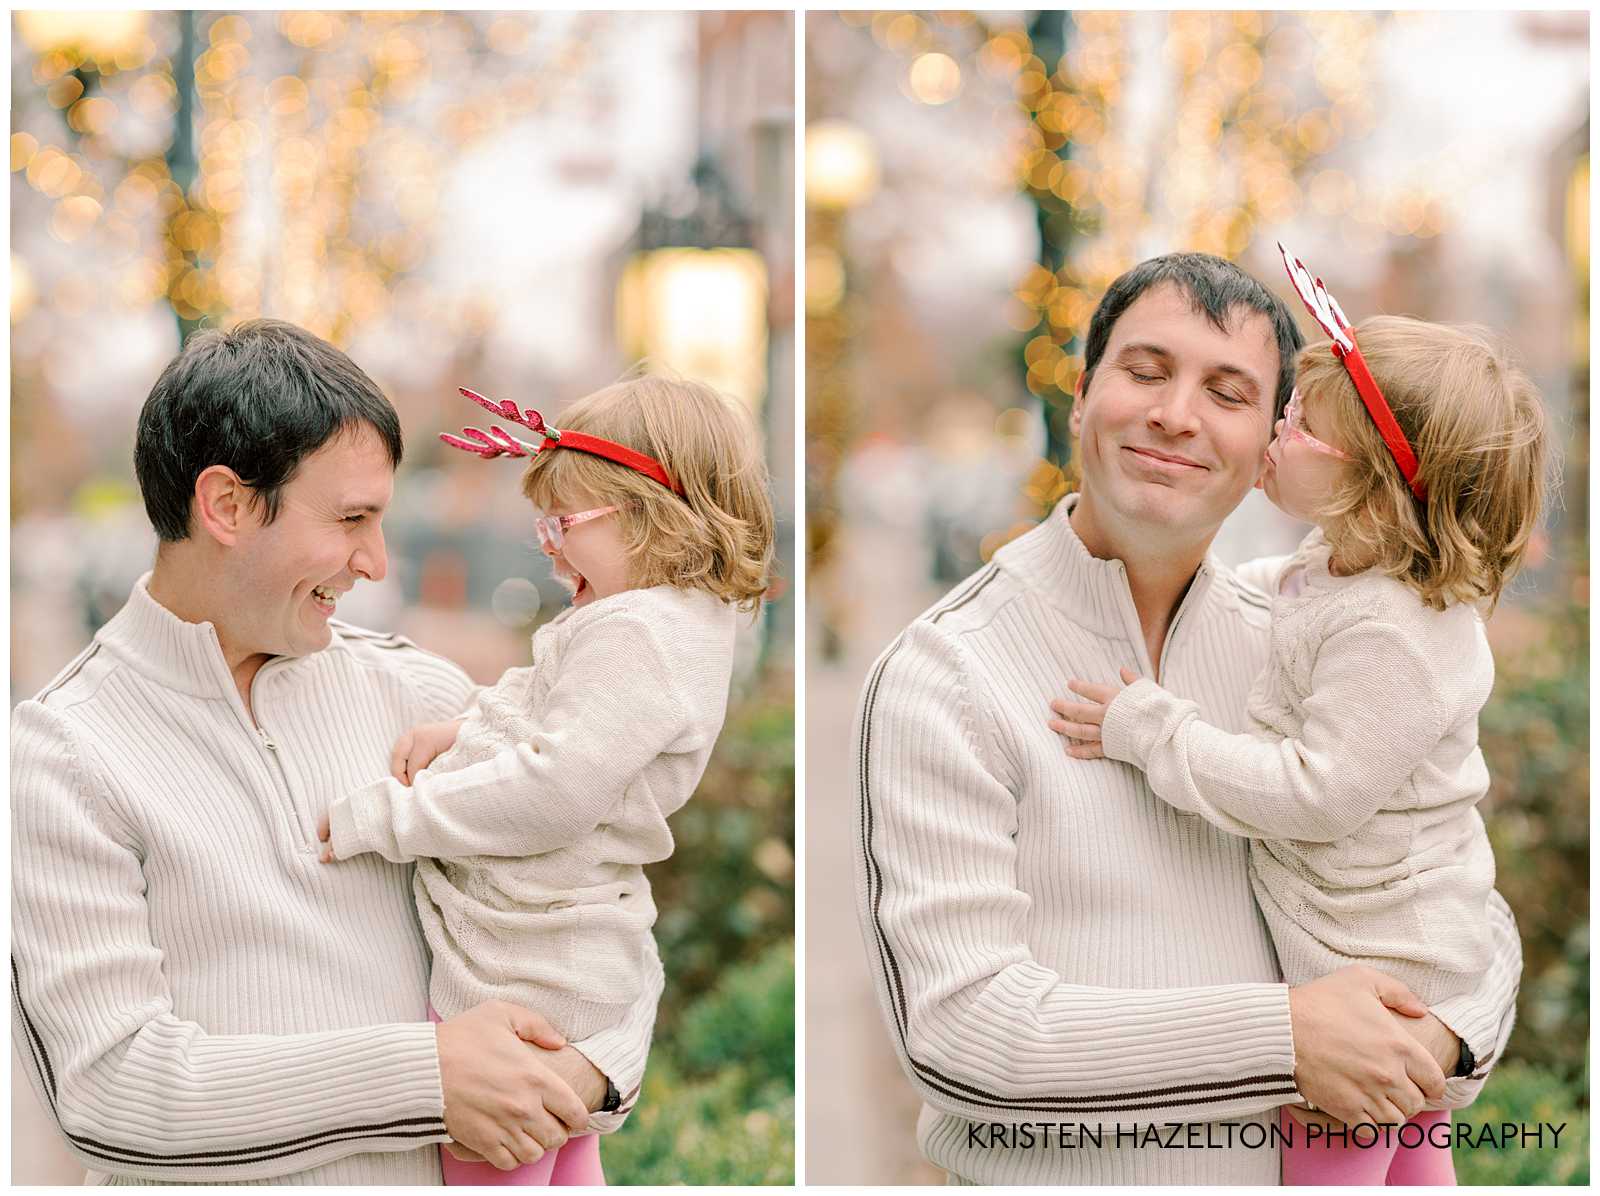 Dad and toddler daughter playing during their Christmas family photoshoot.